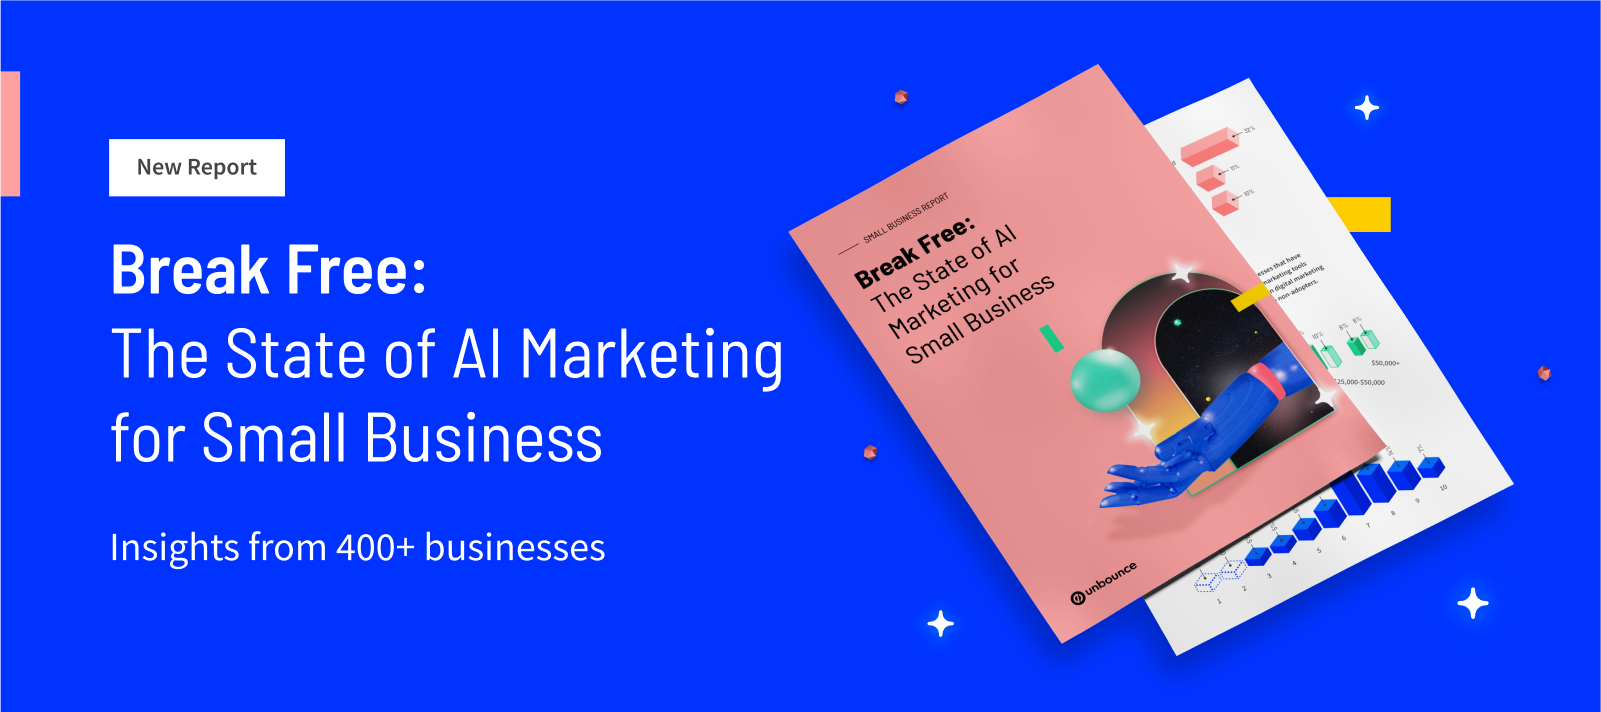 Break free from AI skepticism with learnings from 400+ small businesses